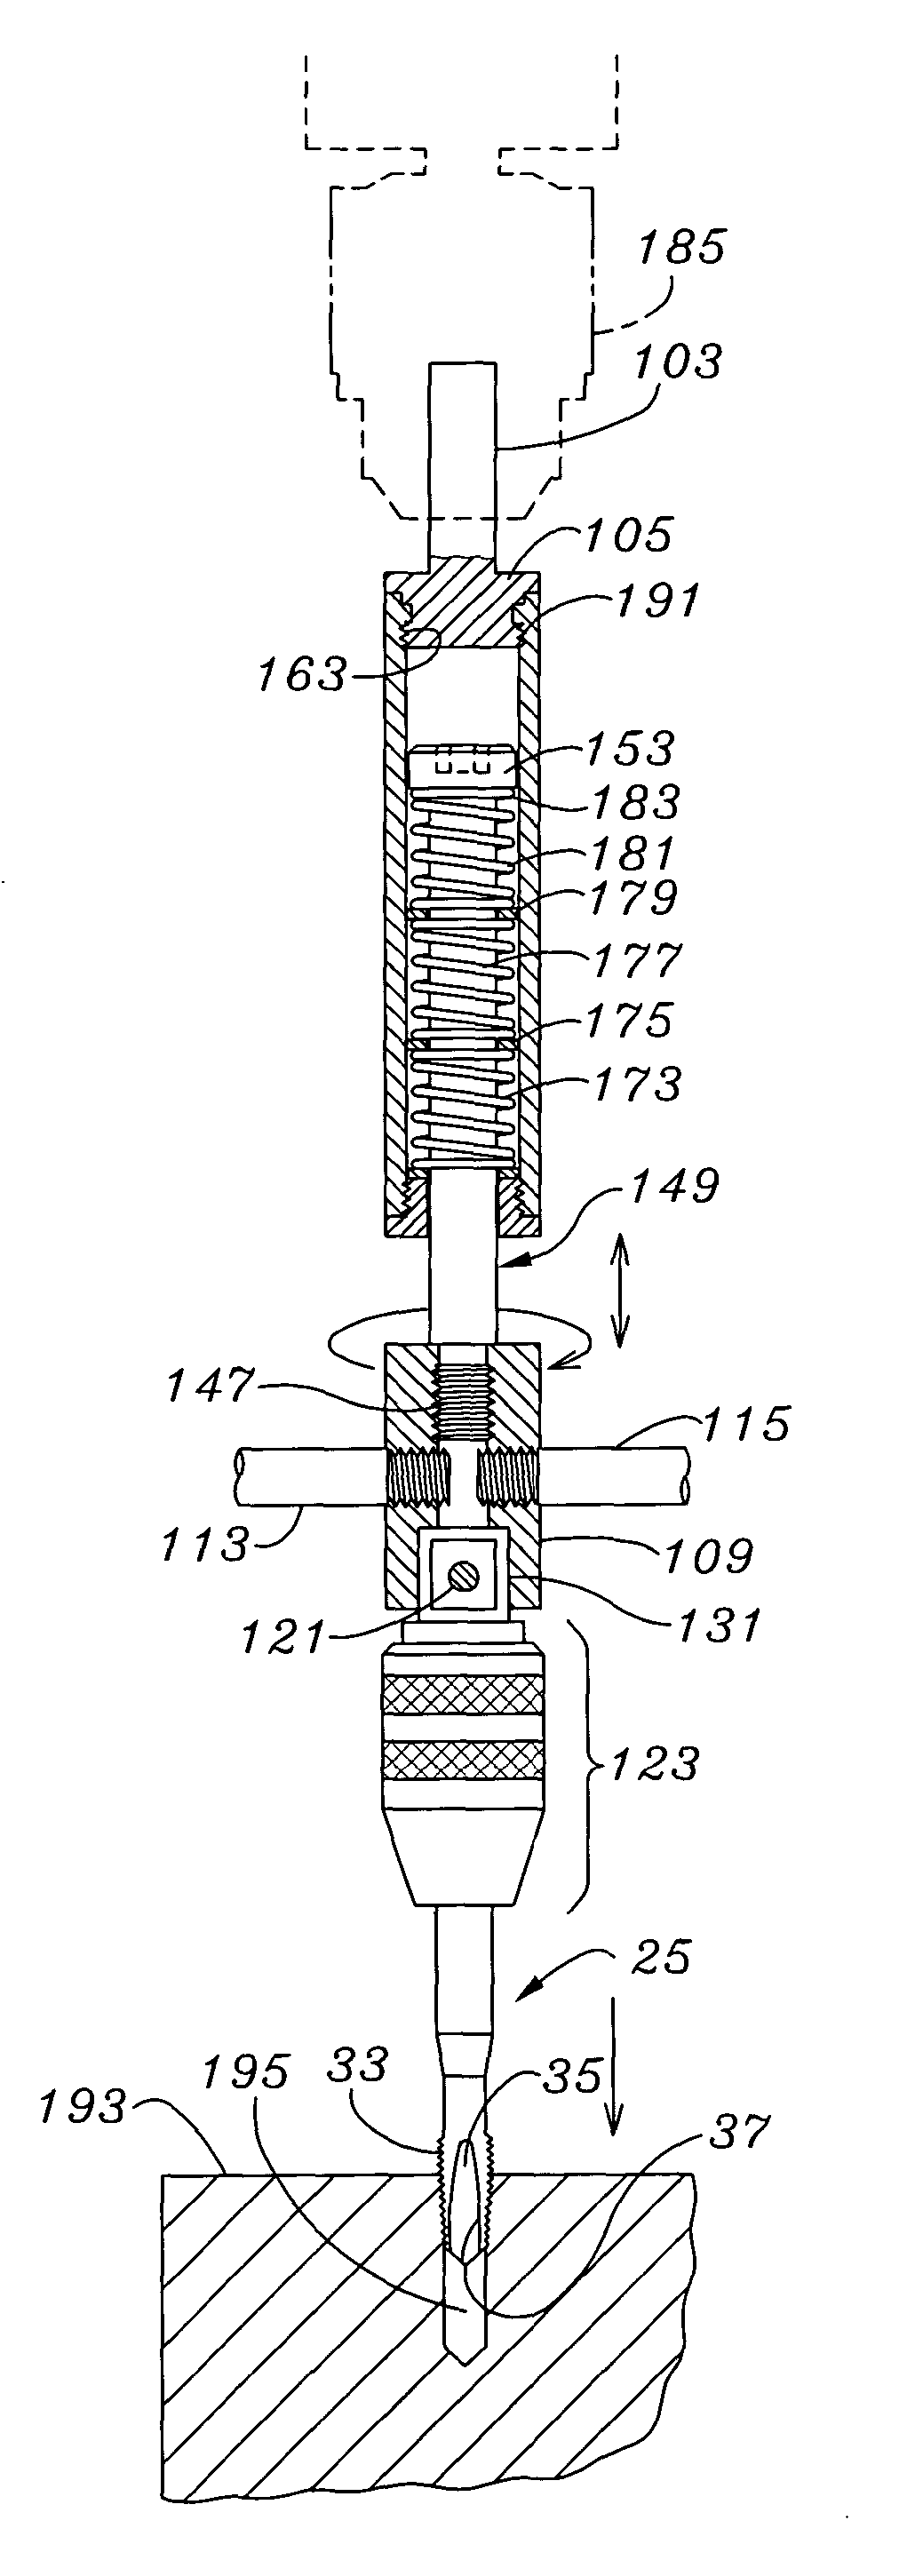 Tapping tool for use with drill press